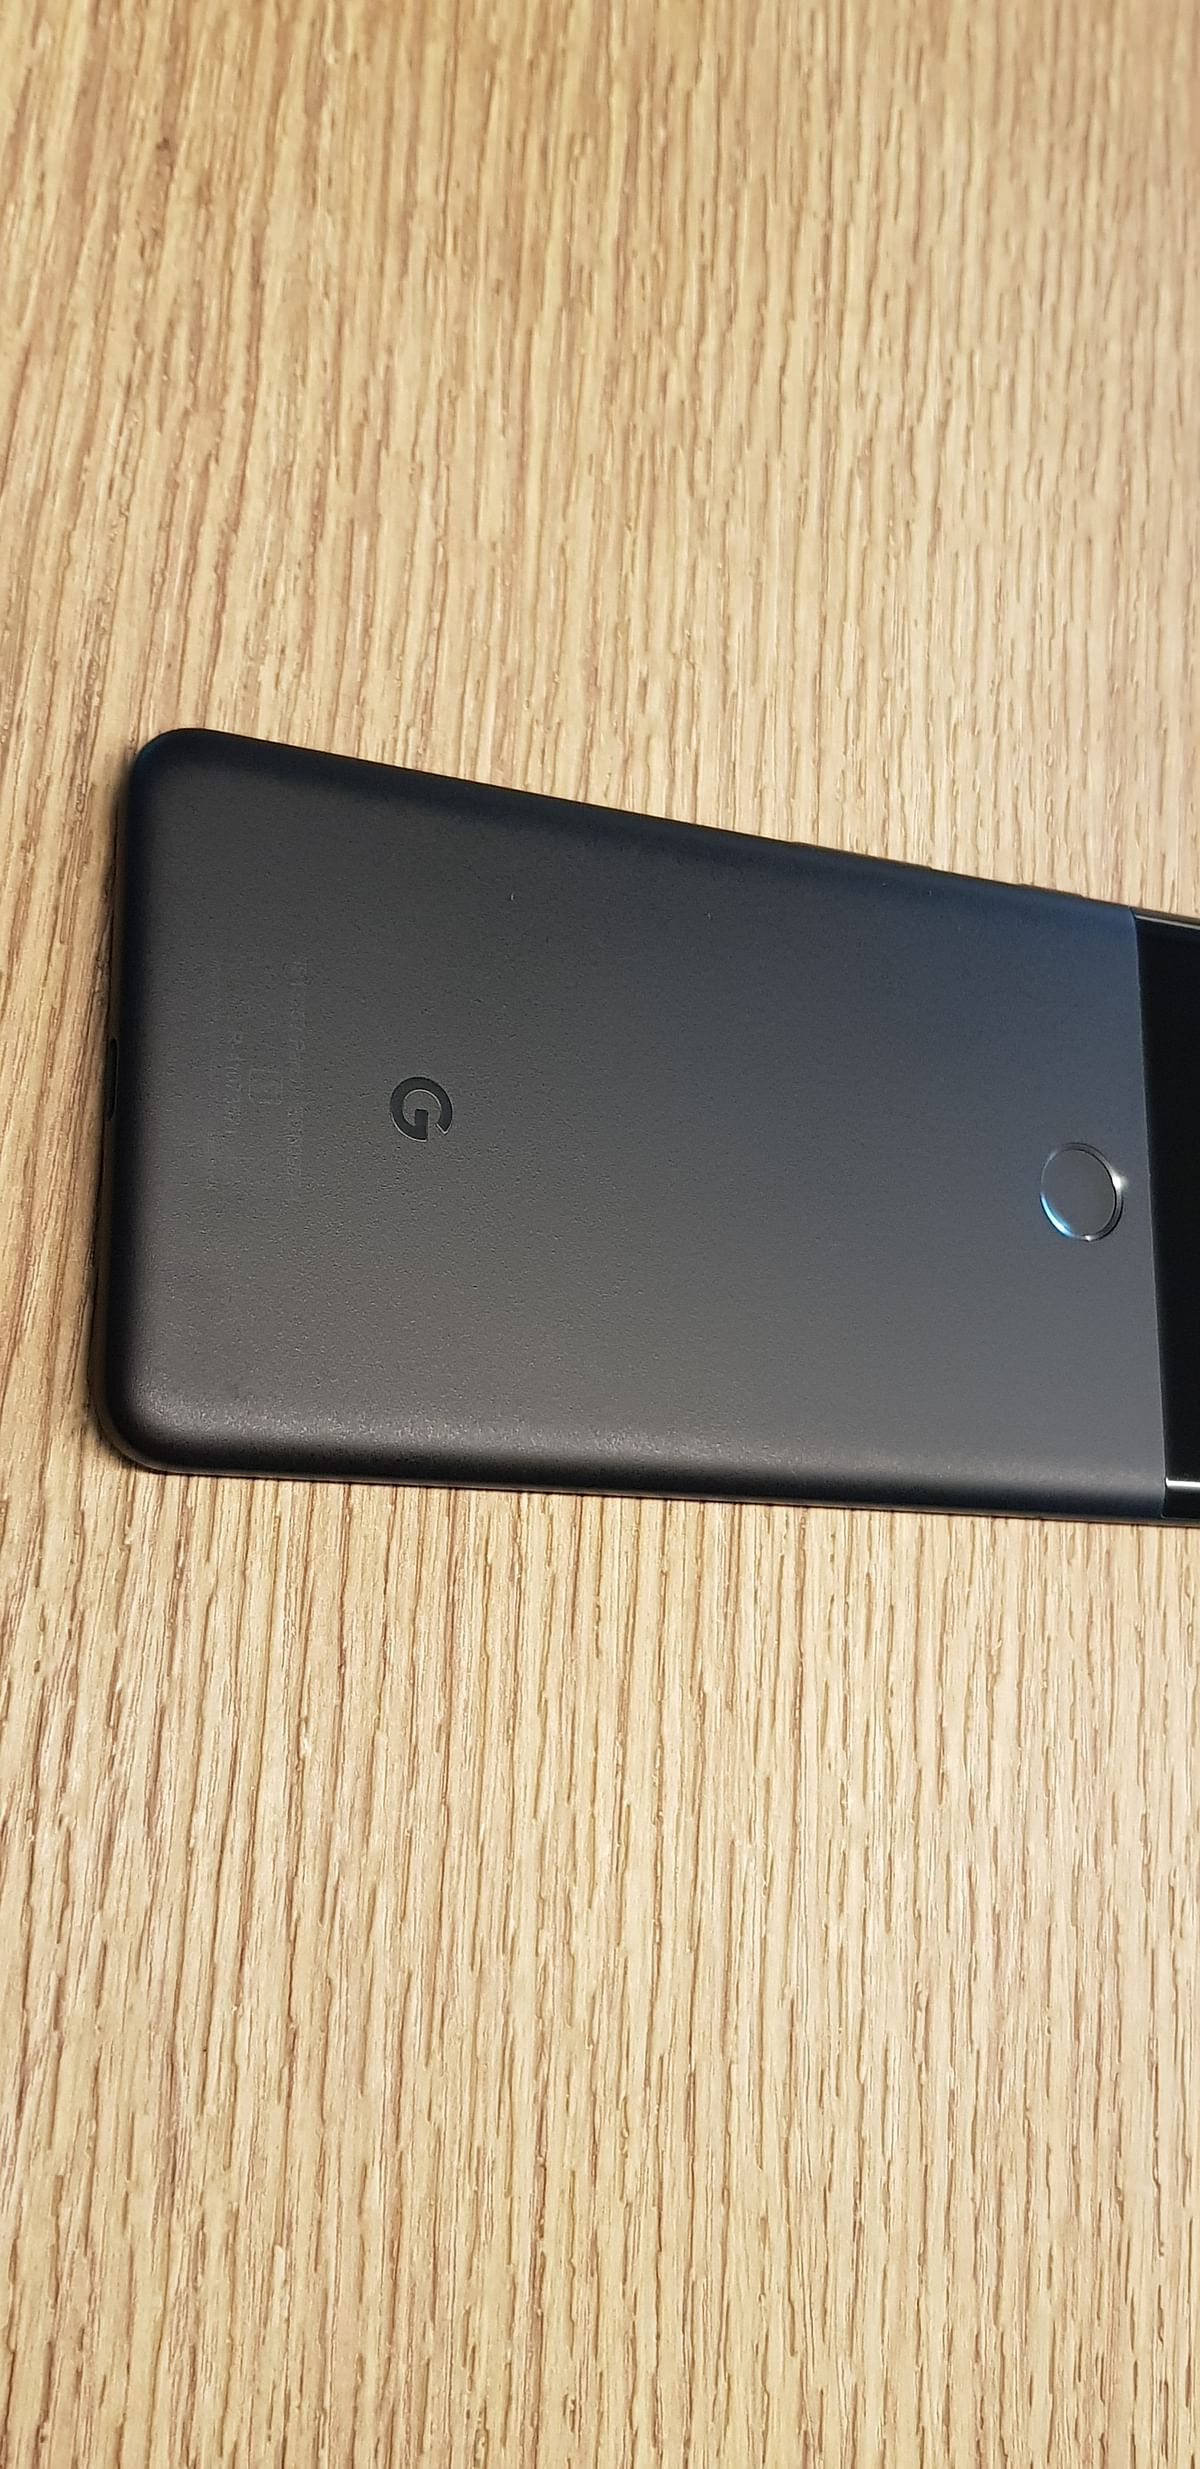 Google Pixel 3 will be launching in few months from now and here’s what the rumour mill has been churning.